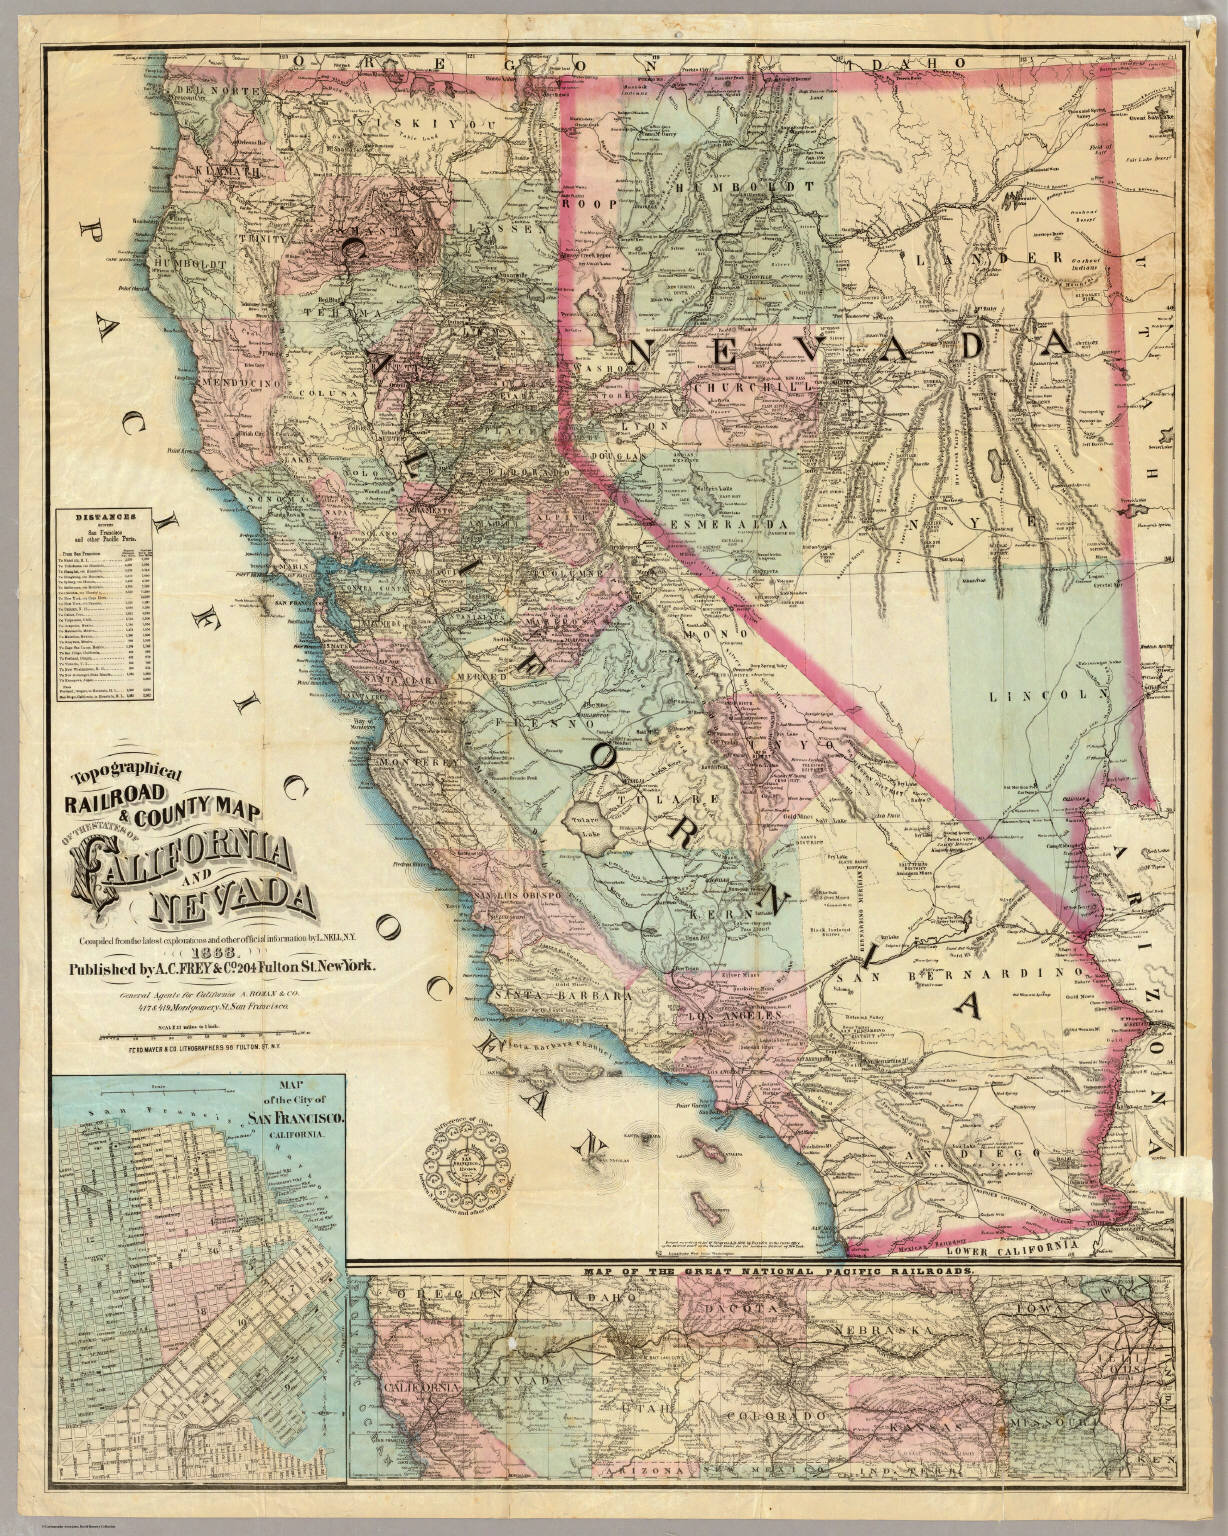 Topographical Railroad And County Map Of The States Of California And